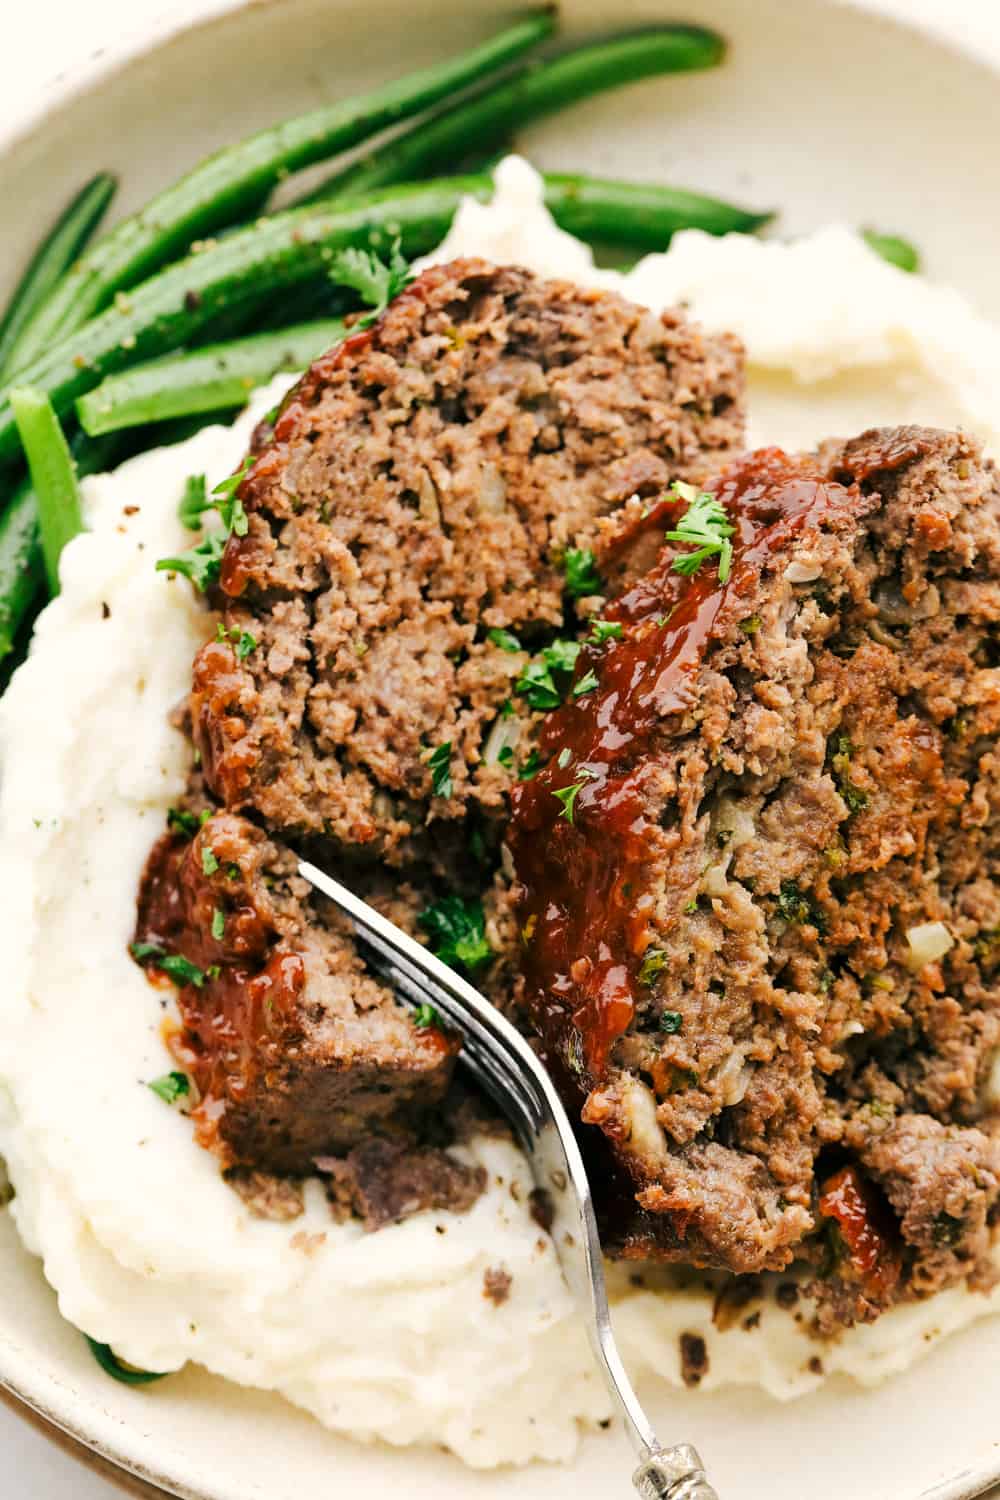 Hearty foolproof meatloaf on a bed of mashed potatoes and beans.